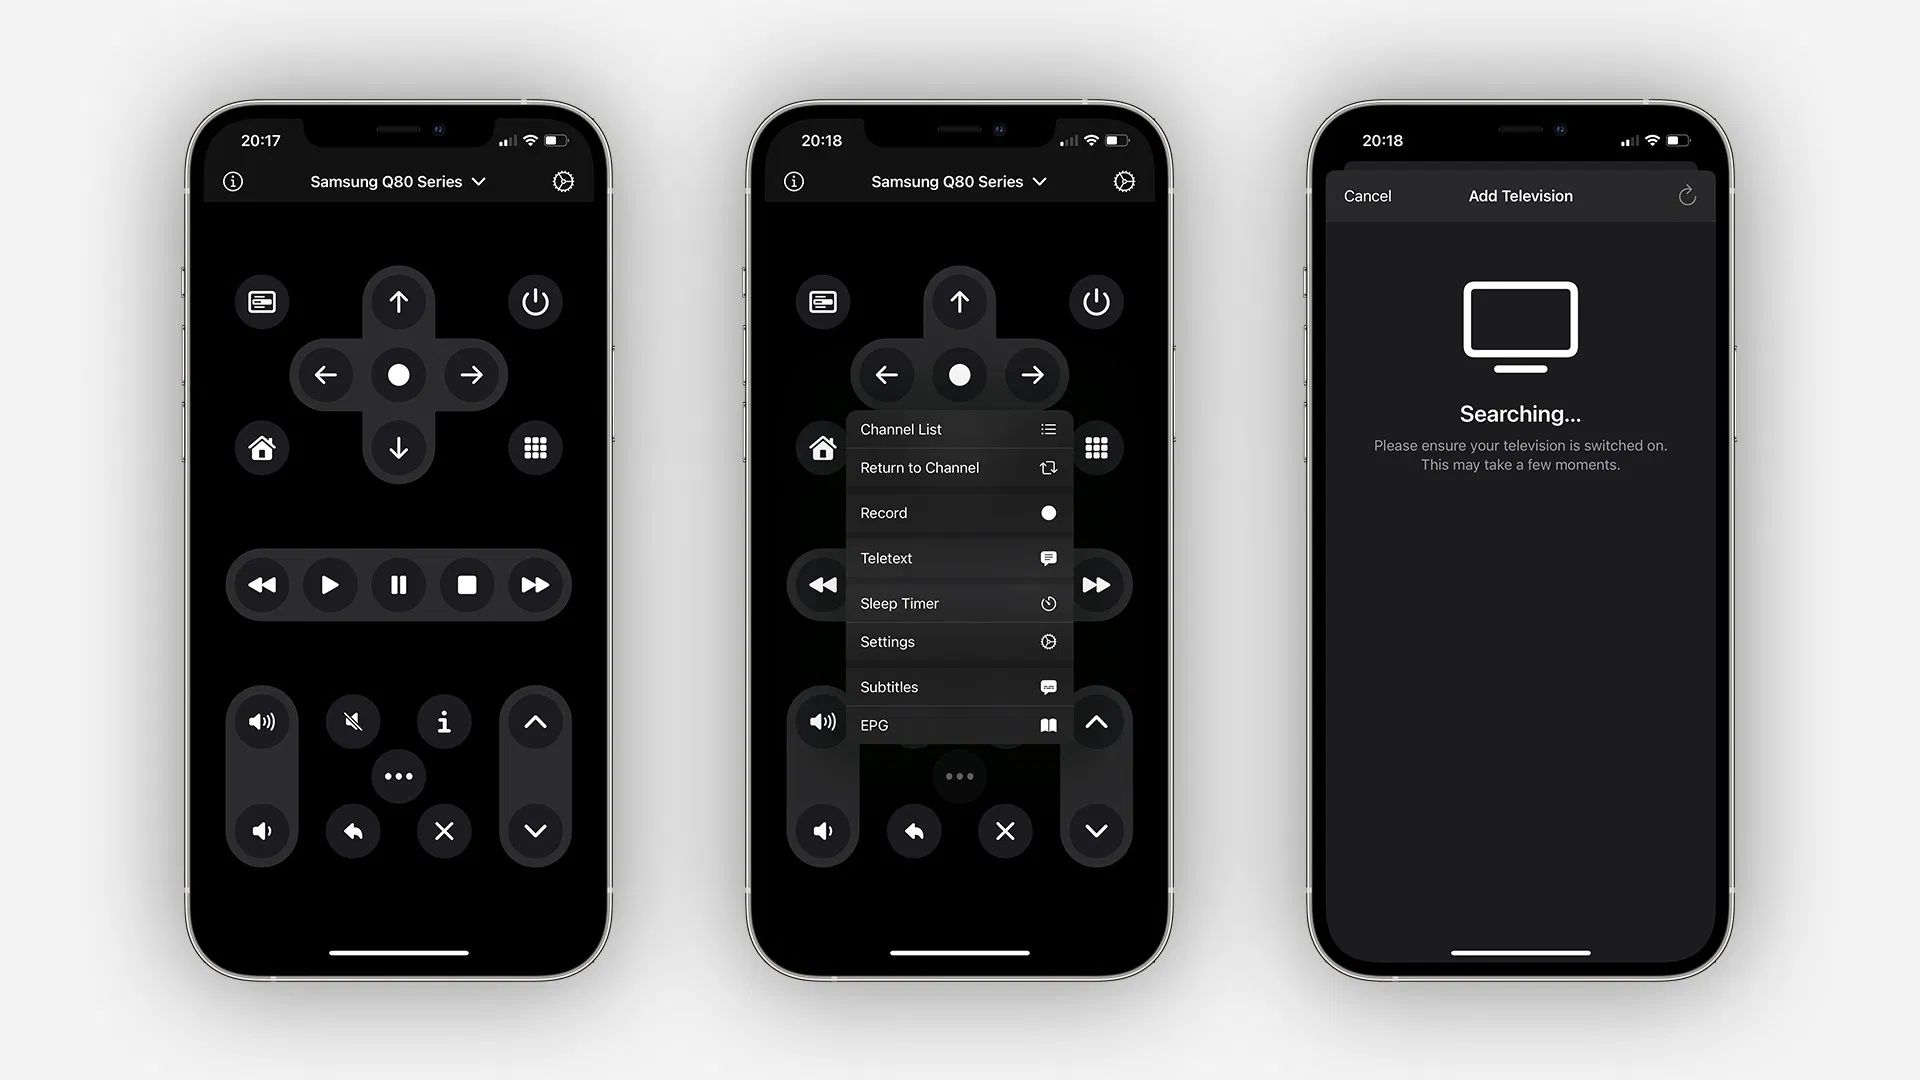 ‘TV Remote’ is an app That Turns Your iPhone Into a Universal Control for Your TV